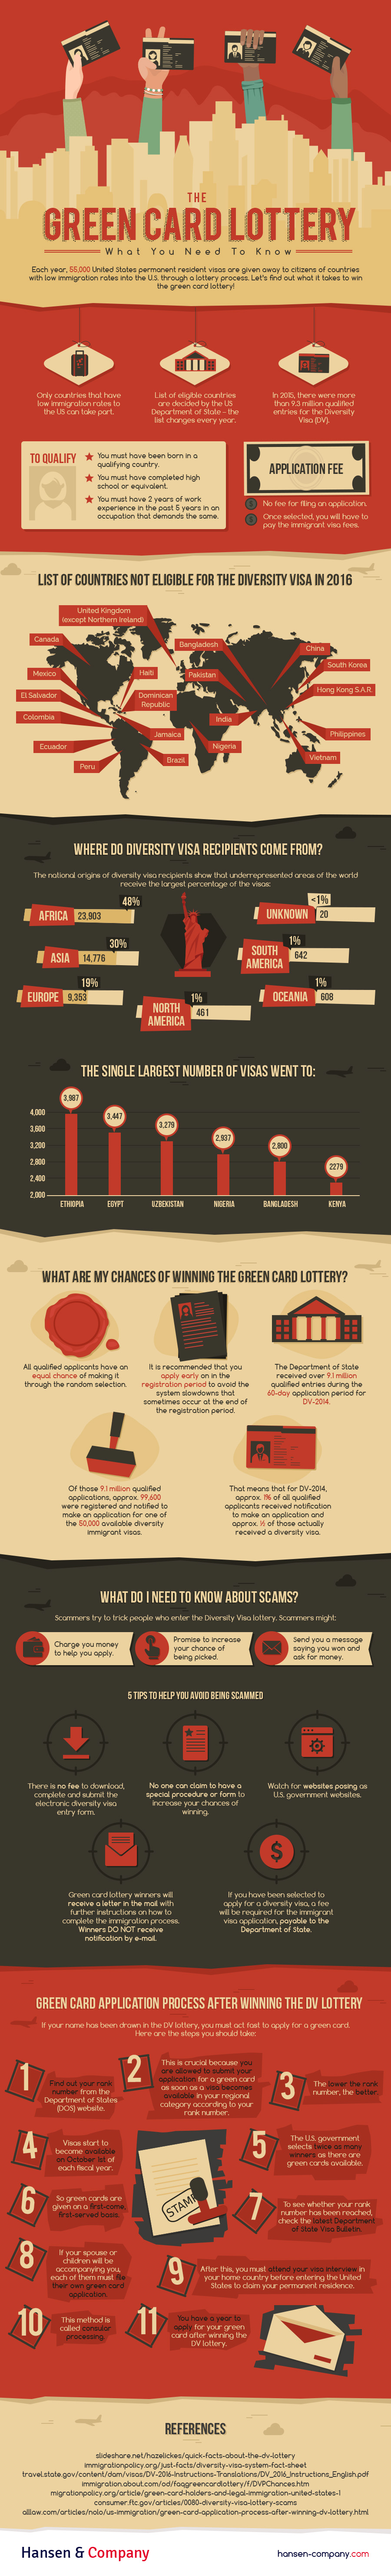 Green card Lottery infographic